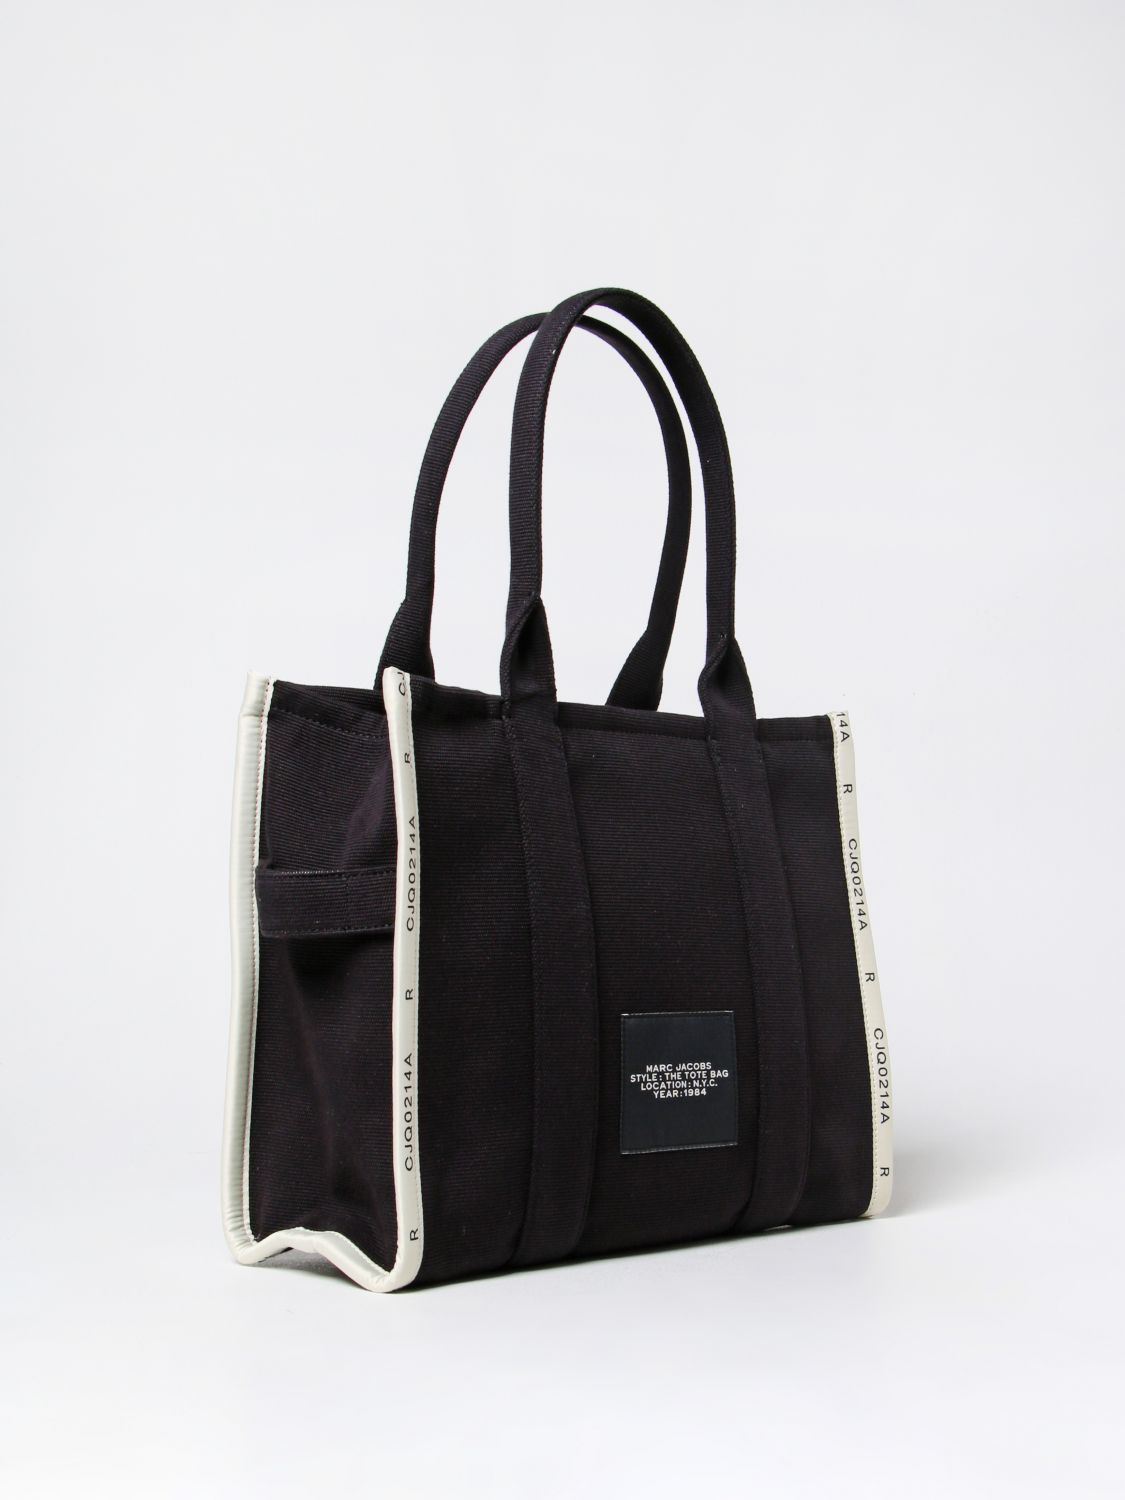 MARC JACOBS: tote bags for women - Black | Marc Jacobs tote bags ...